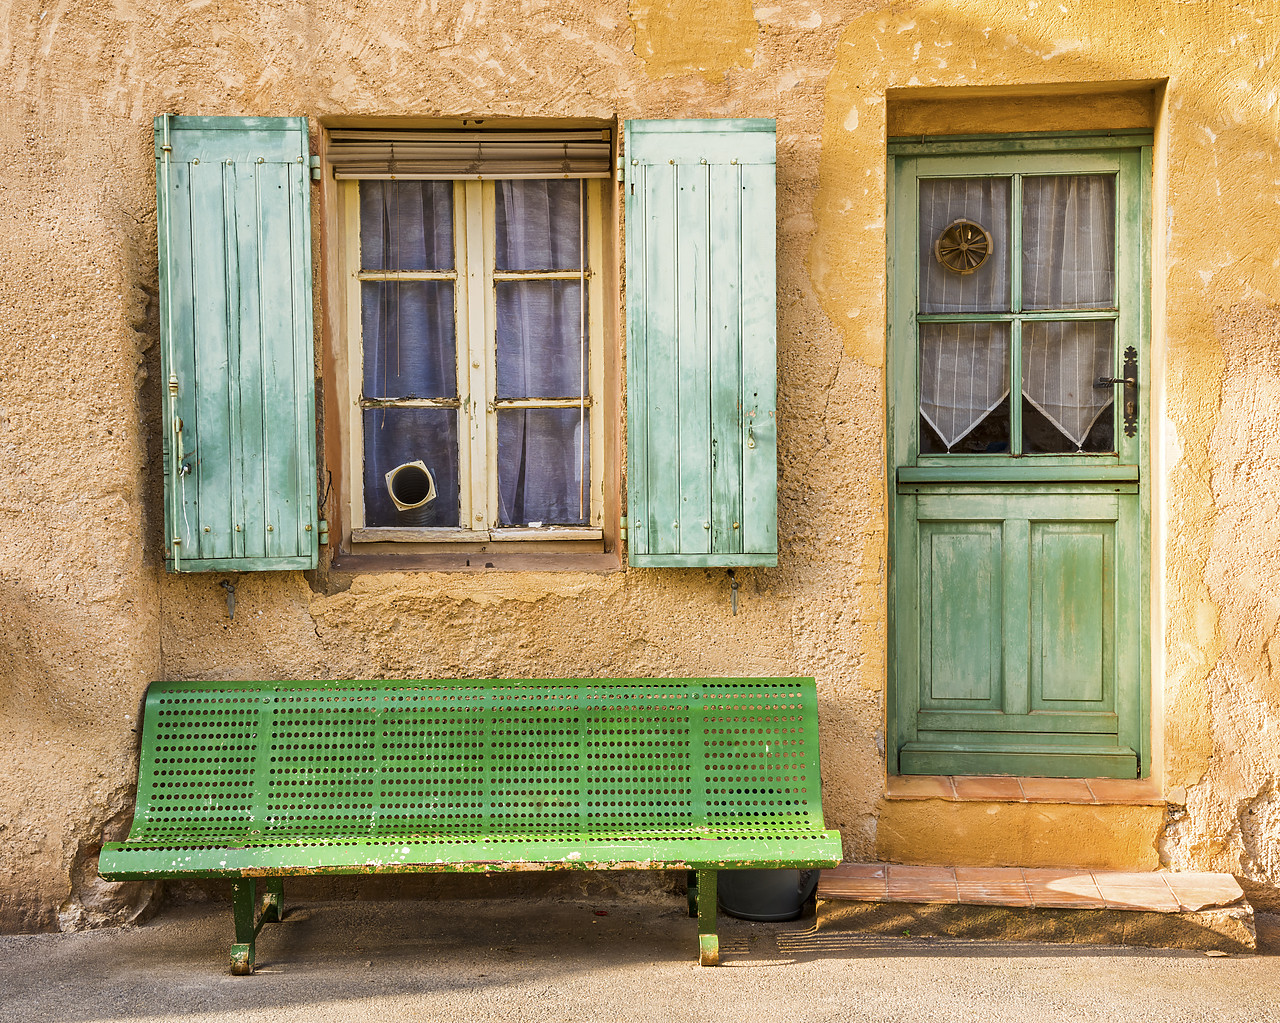 #150340-1 - Green Door, Bench & Shutters, Roussillon, Provence, France